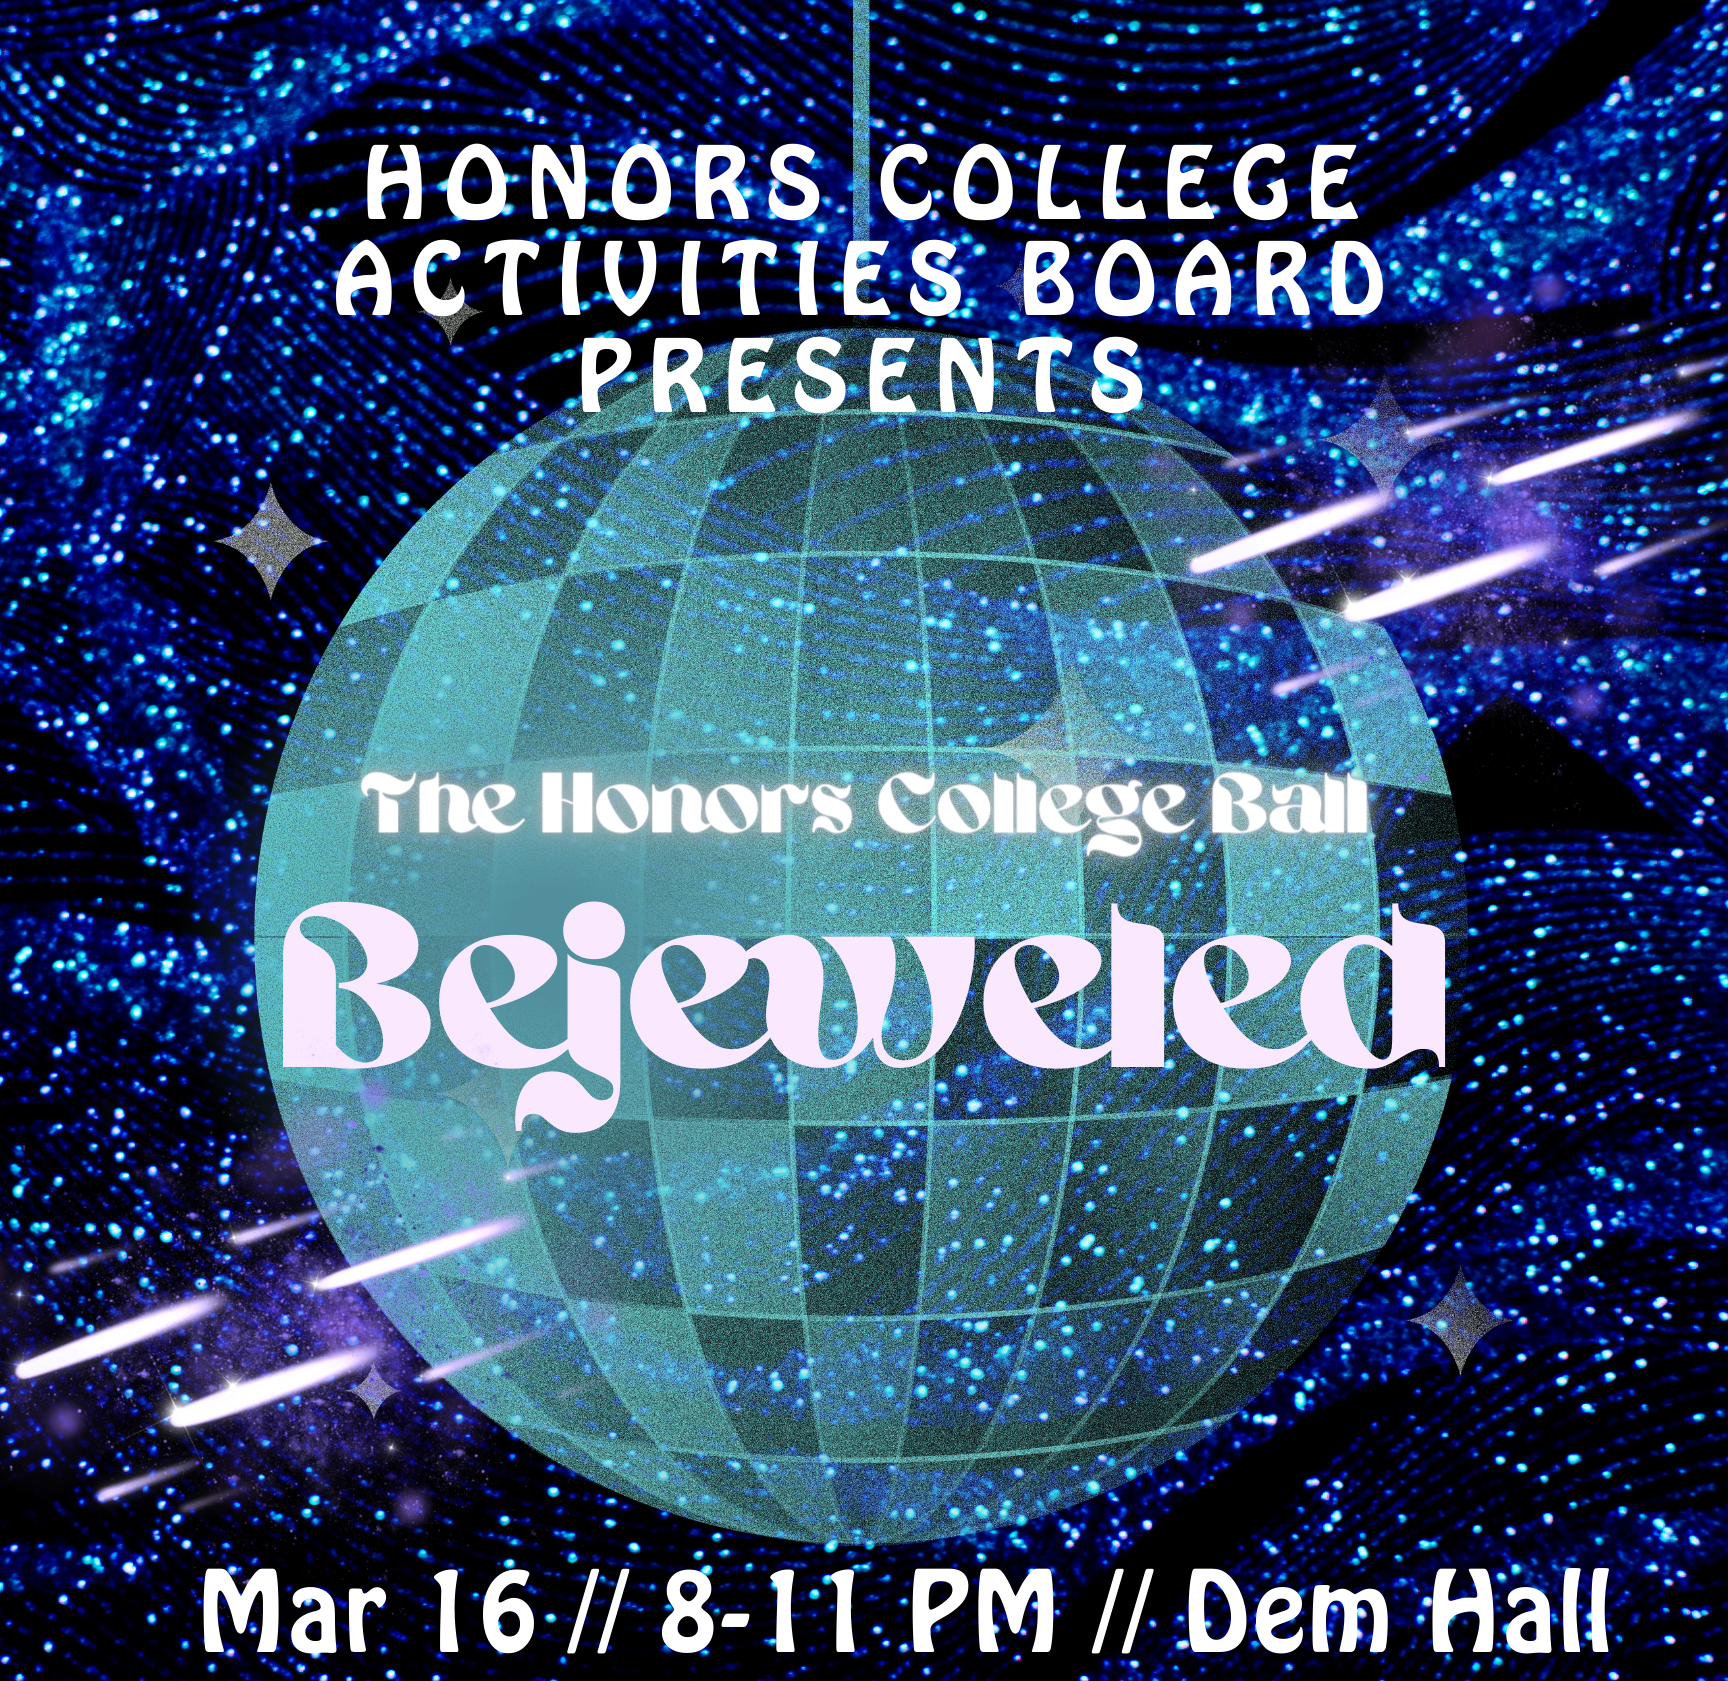 Graphic of a disco ball on a dark cosmic background. Text on the graphic reads: "Honors College Activities Board Presents the Honors College Ball Bejeweled, Mar 16, 8-11 PM, Dem Hall"